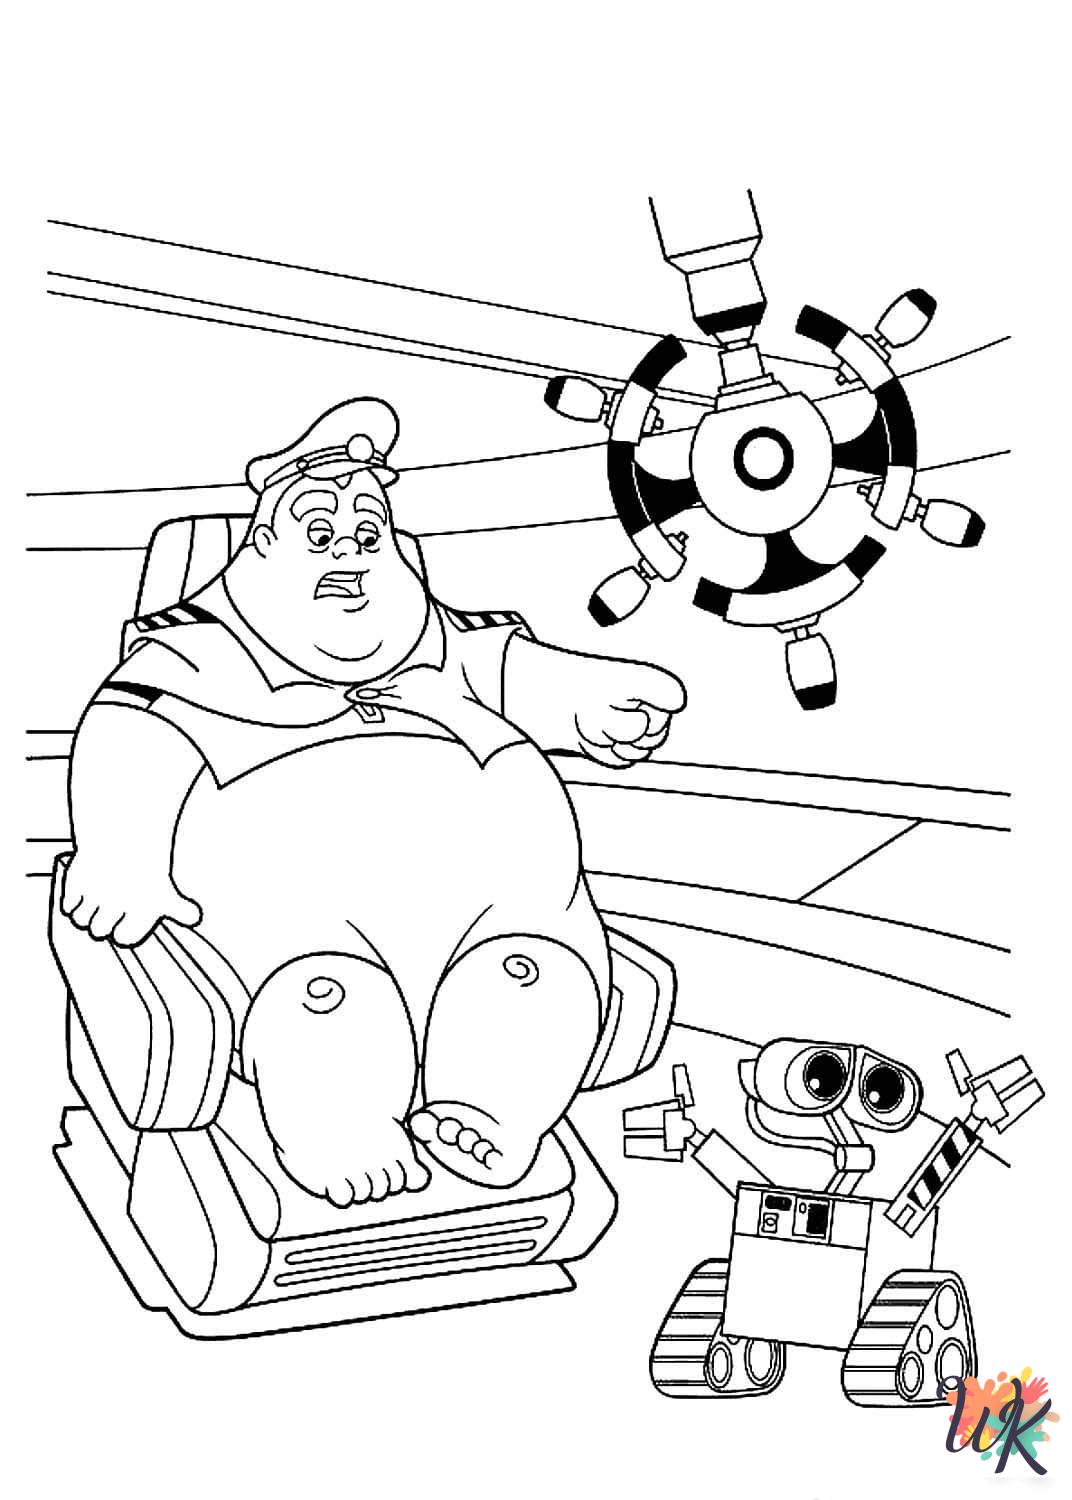 WALL-E themed coloring pages